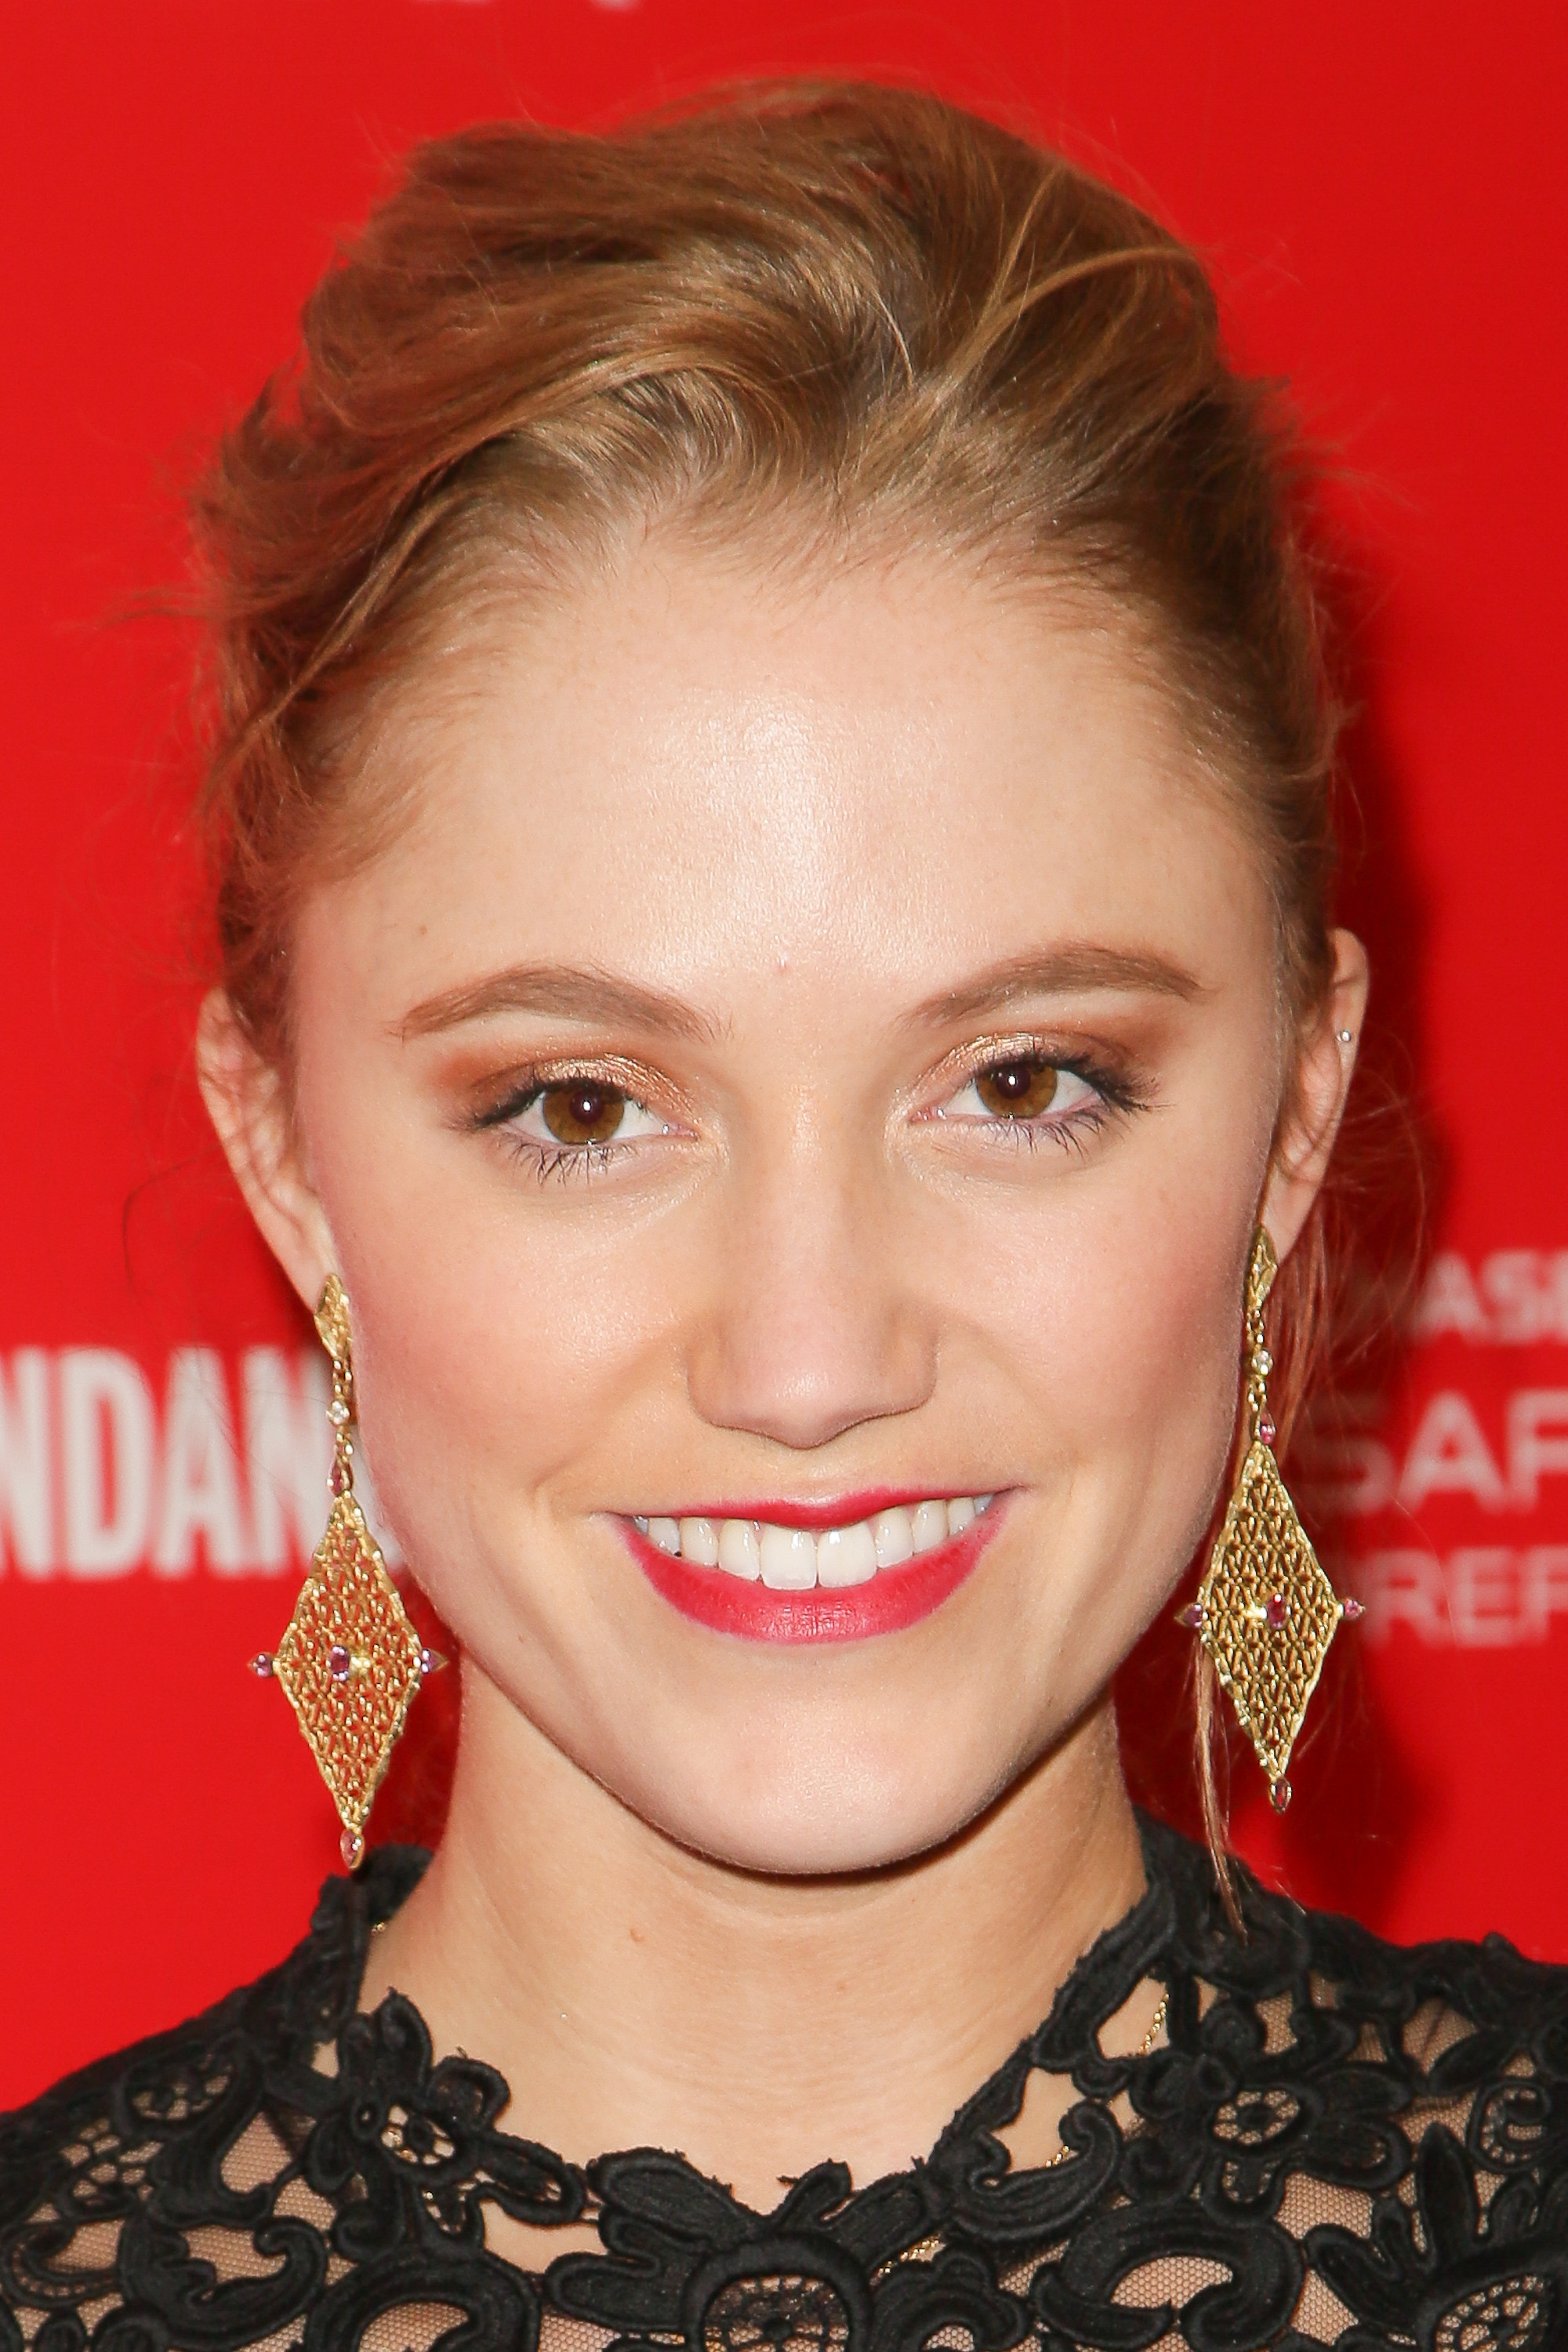 Actress Maika Monroe arrives at the "It Follows" premiere during the 2015 Sundance Film Festival on January 24, 2015 in Park City, Utah. (Chelsea Lauren—Getty Images)